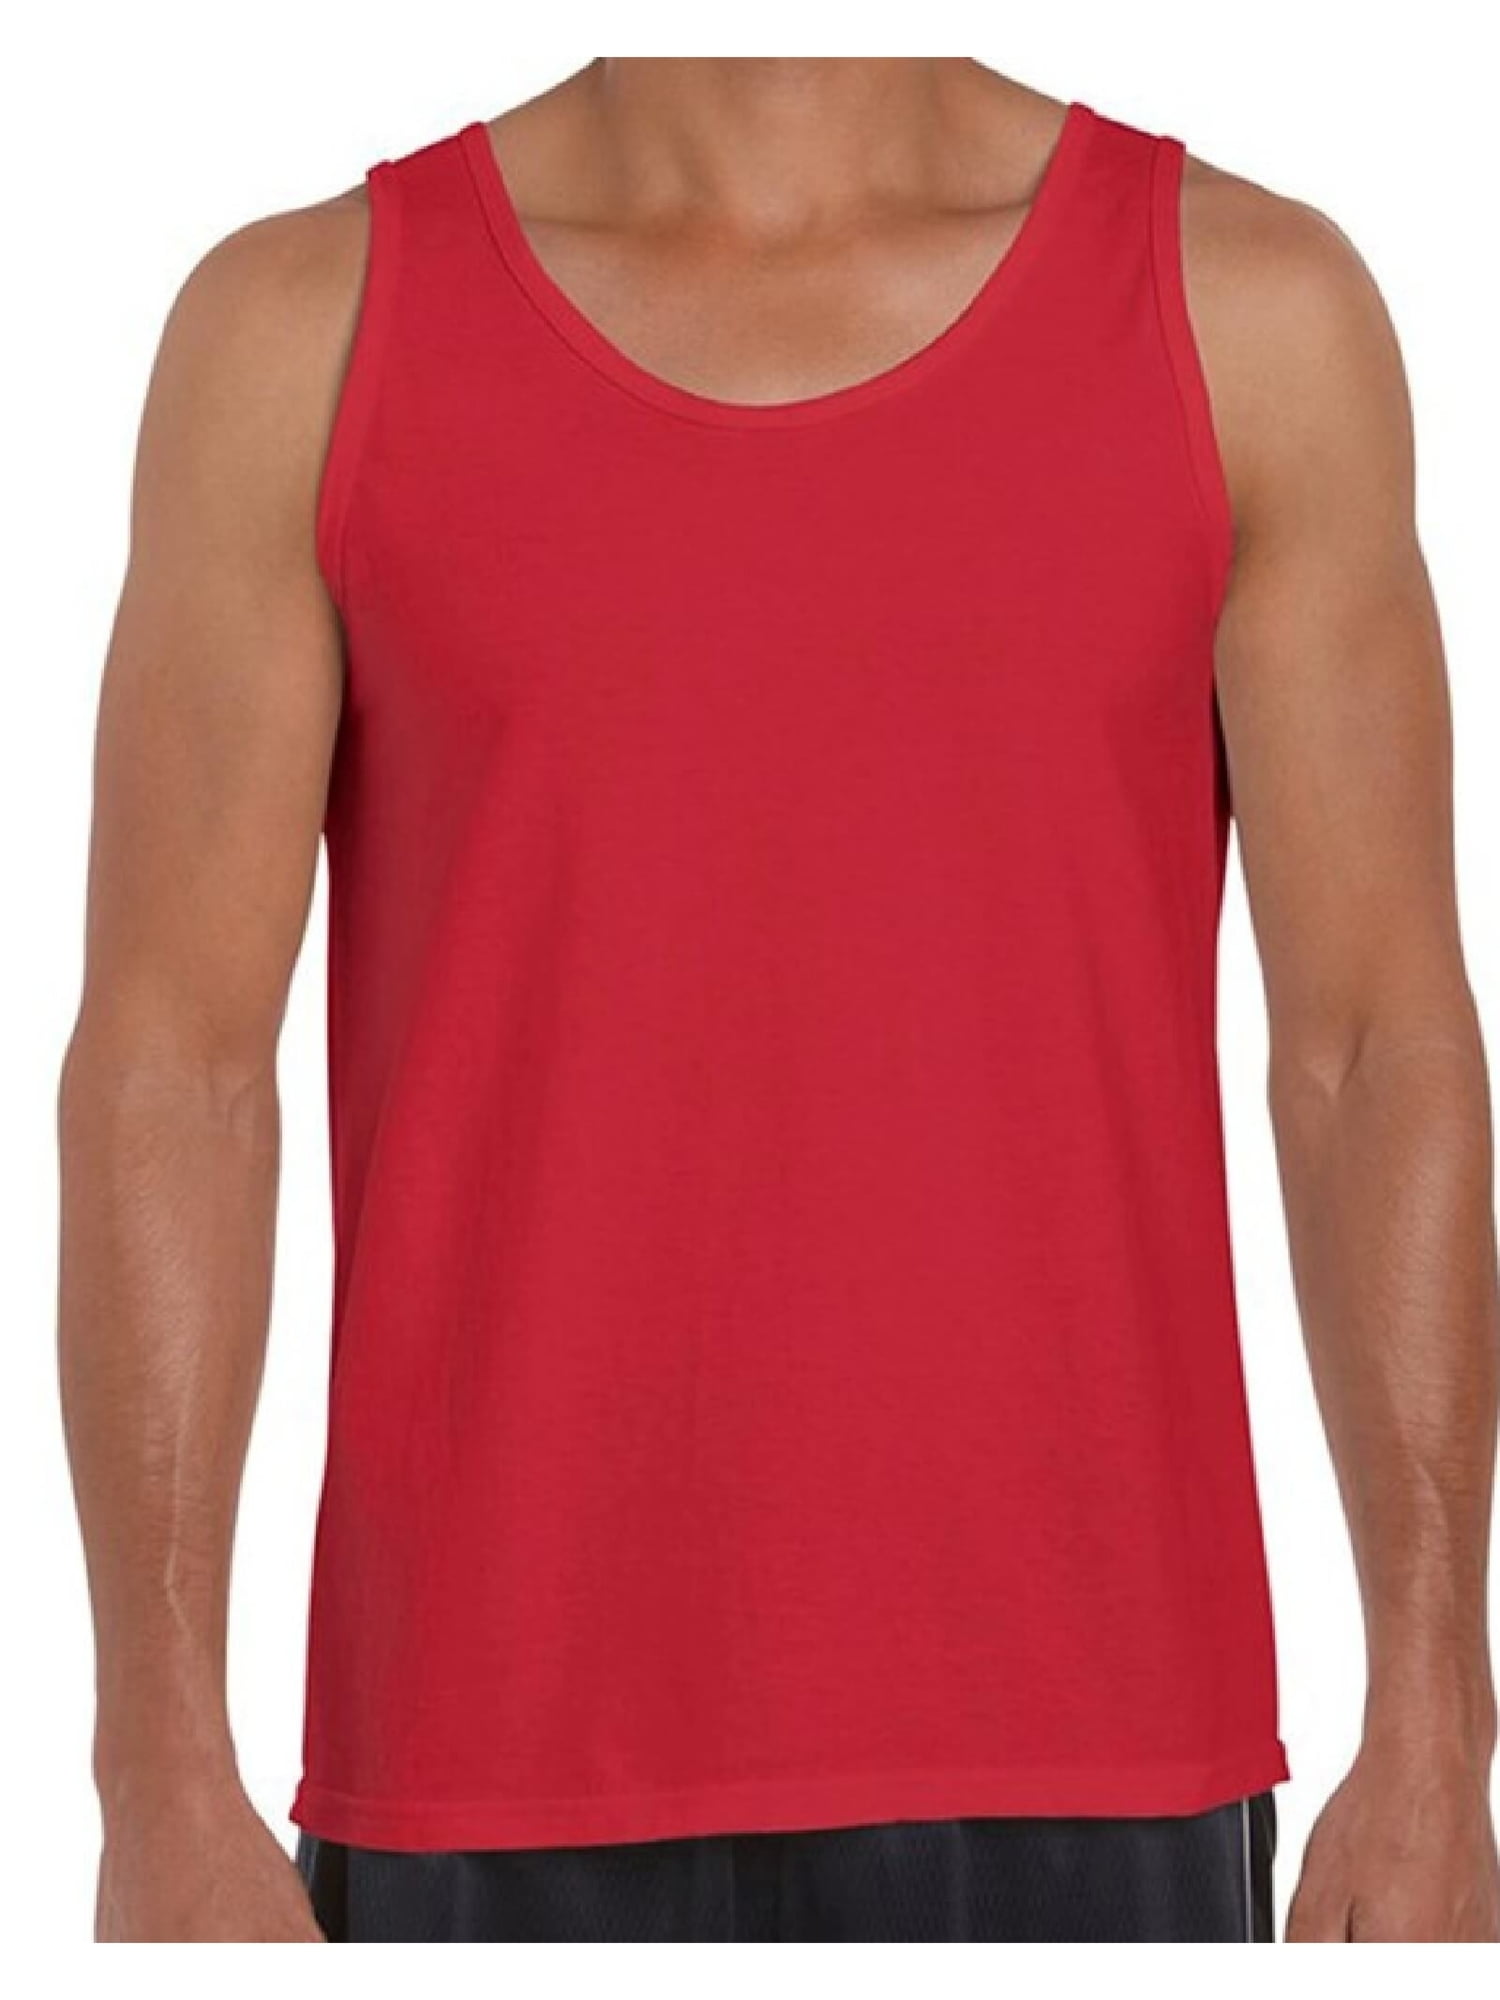 Gildan Men's Tank Top Mens Muscle Shirts Best Mens Tanks Cotton Sleeveless  Shirts for Him Blank All Color Red Tees for Men Red Tanks Red Tank Top for